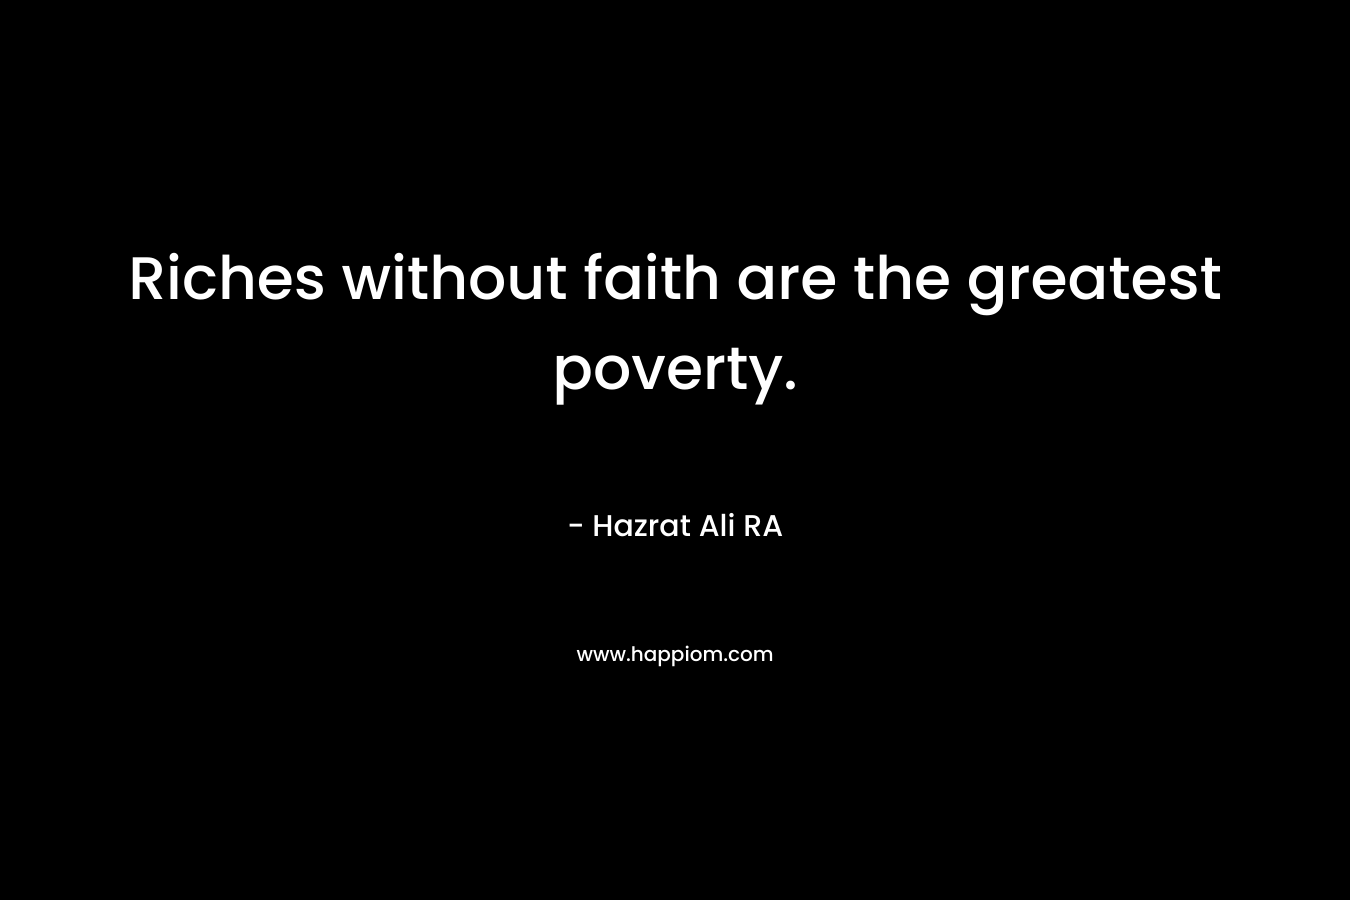 Riches without faith are the greatest poverty.